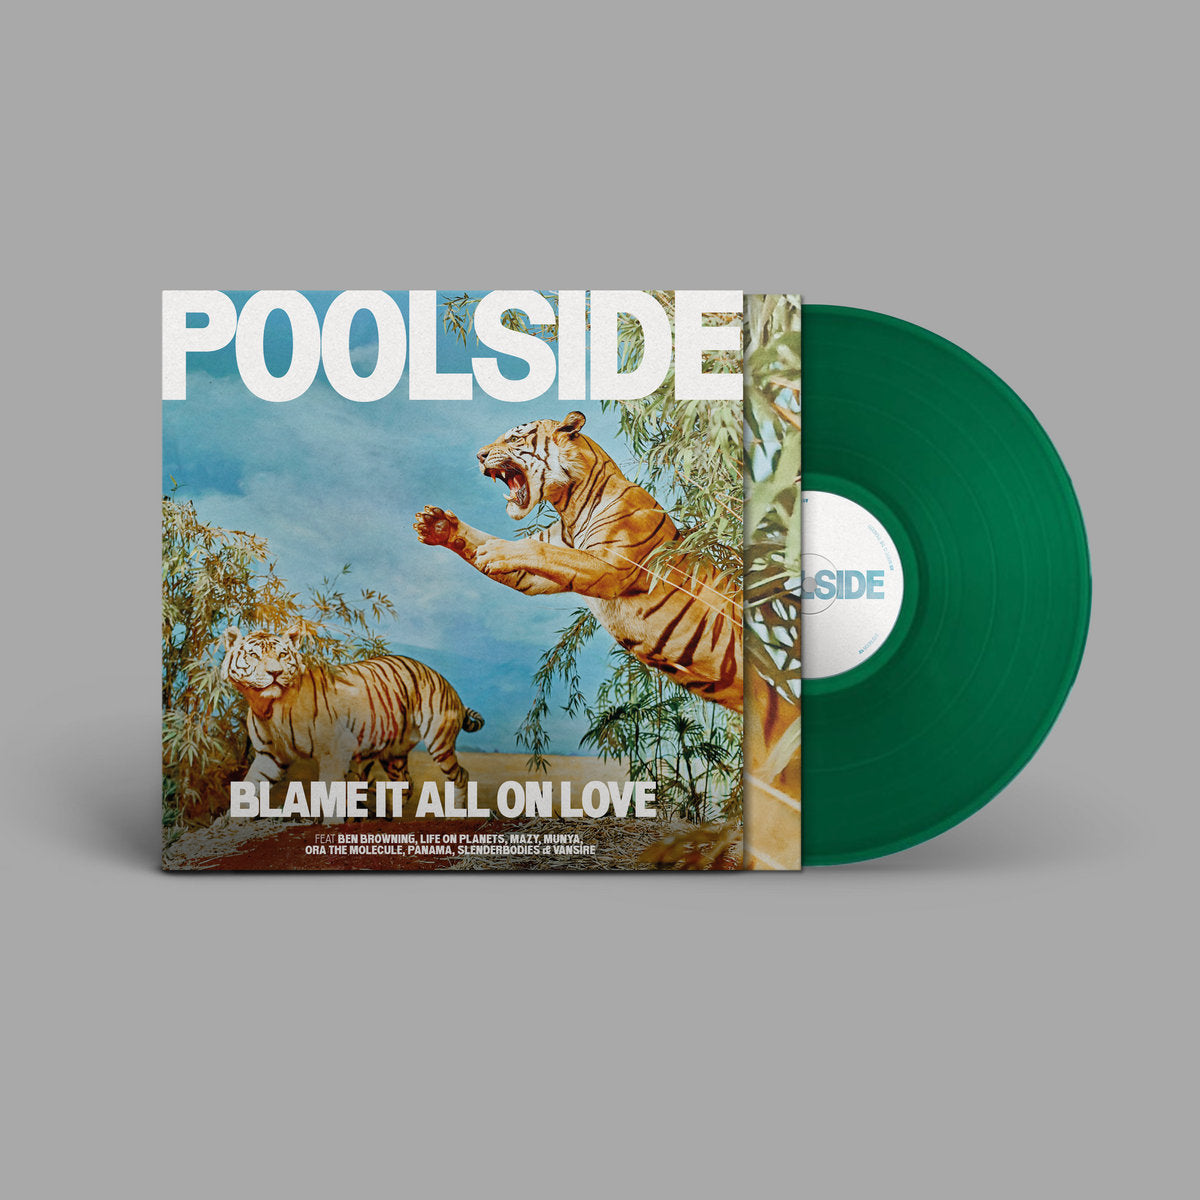 Poolside - Blame It All On Love: Limited Green Vinyl LP